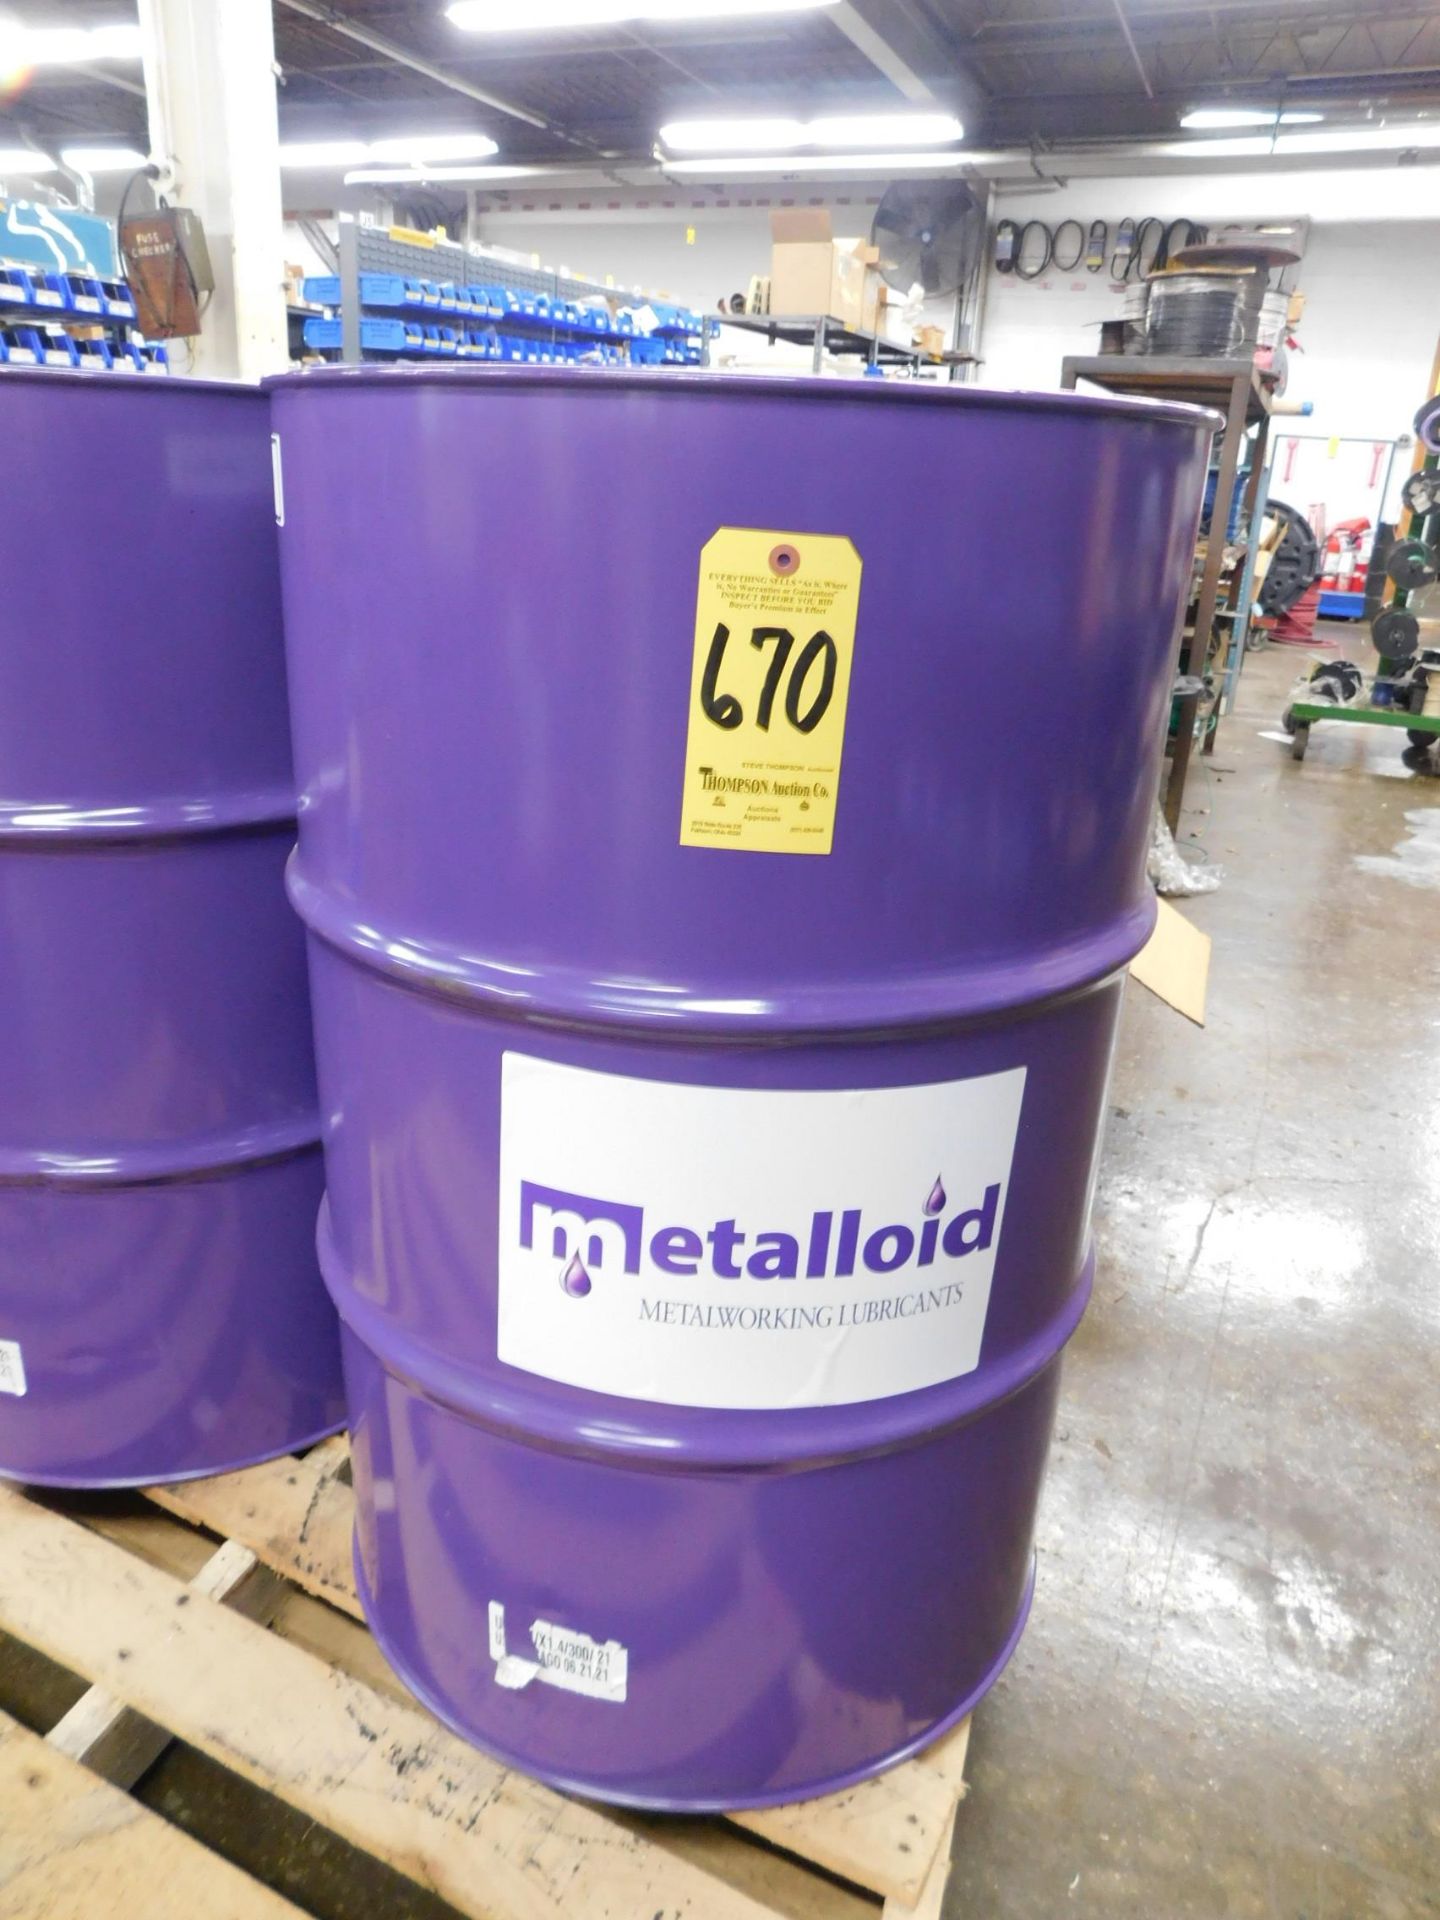 55 Gallon Drum of Metdraw 560 Metalworking Lubricant - Image 2 of 2